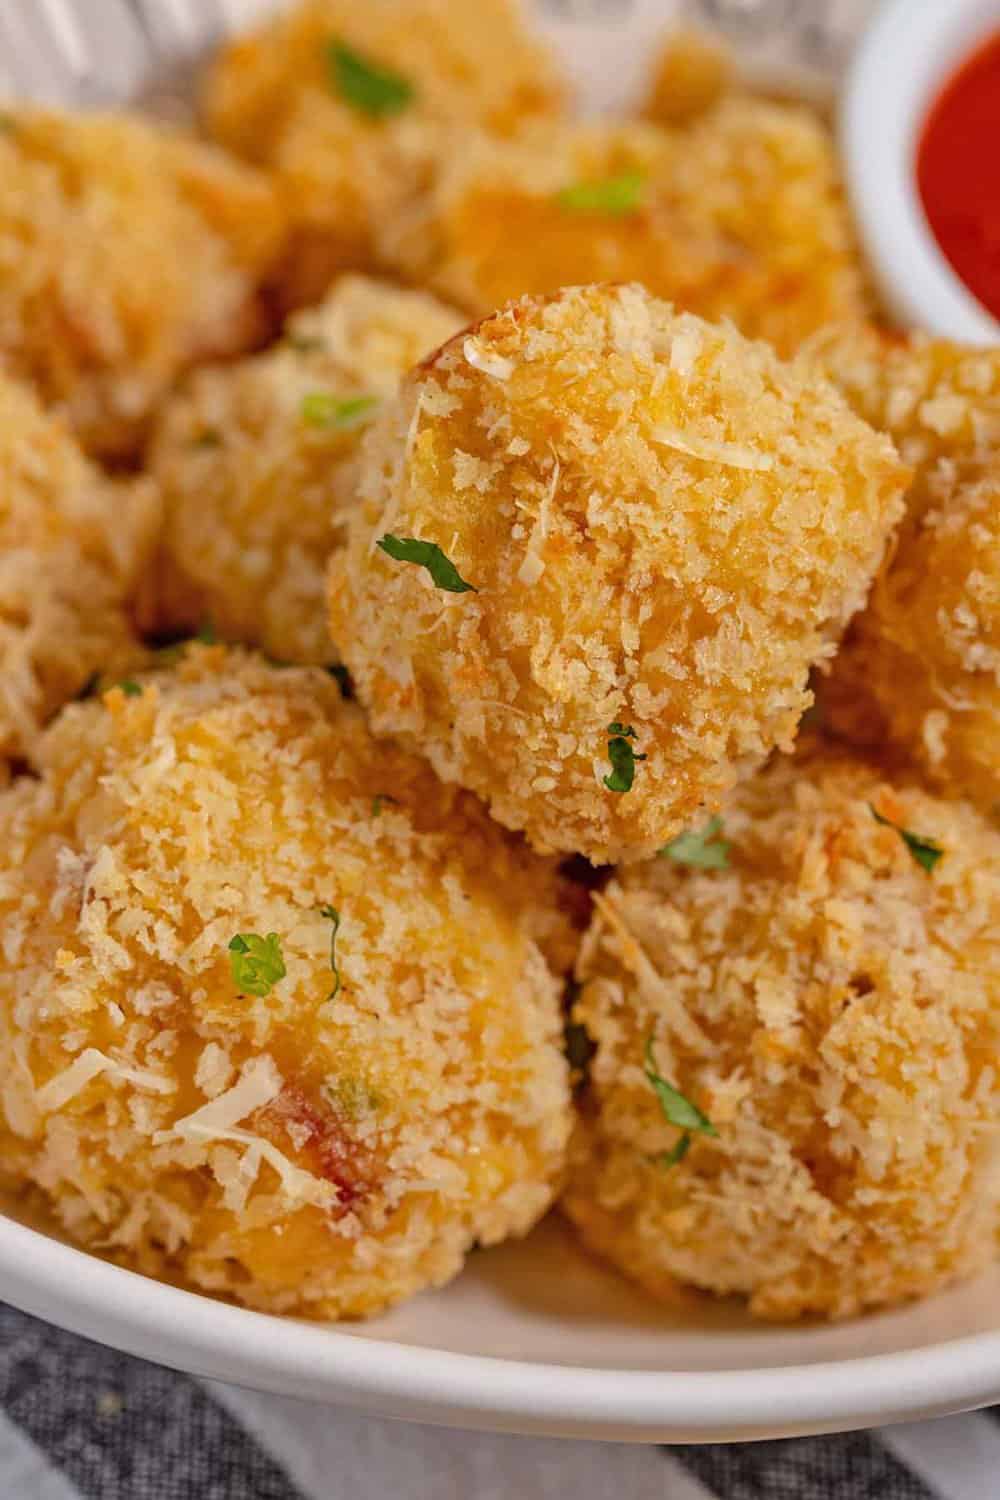 Mac and cheese balls on a plate.